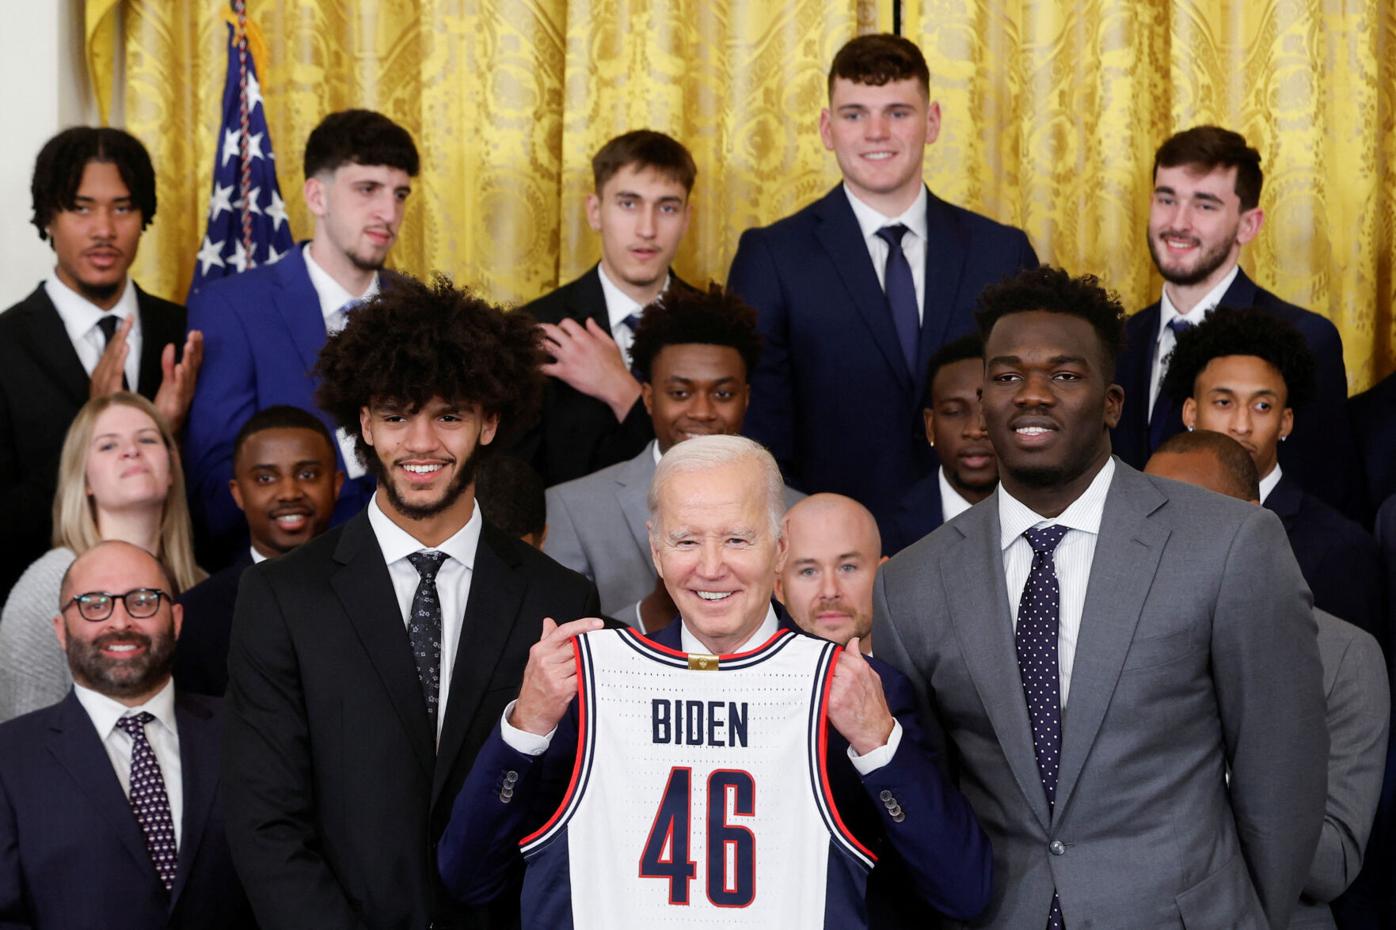 If the Raptors pull off an NBA championship, would Canada's team get a  White House welcome?